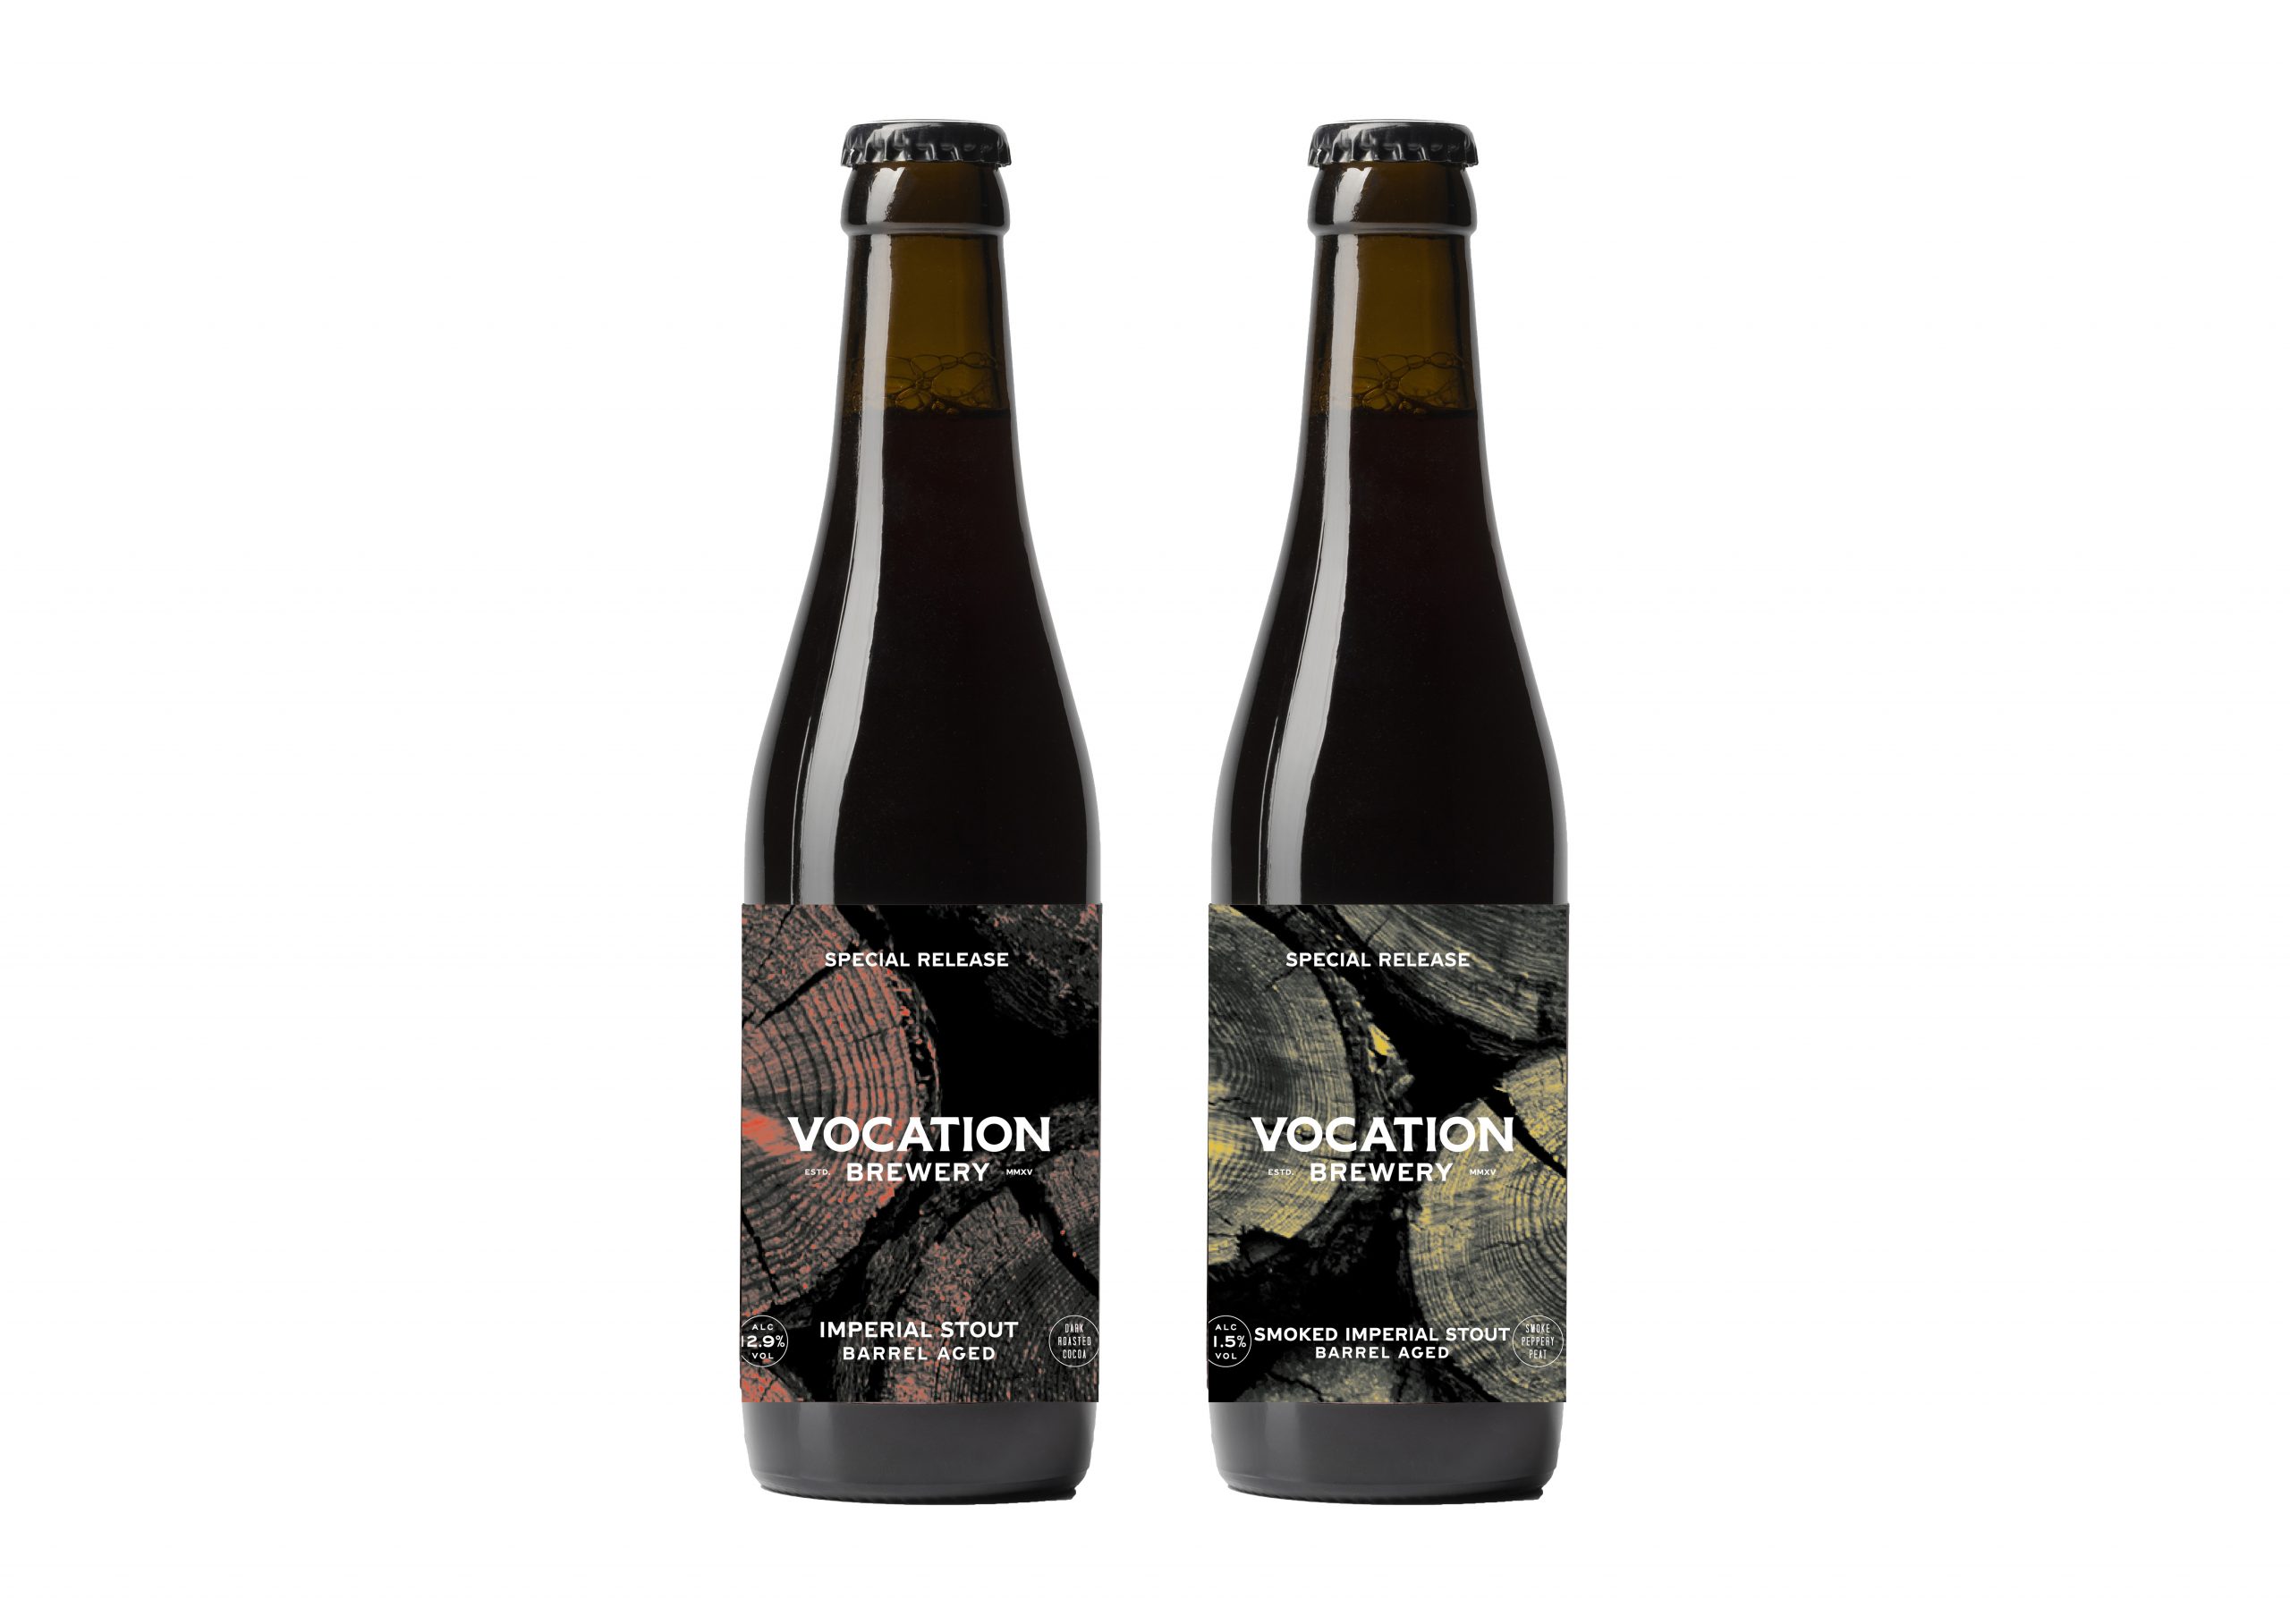 Vocation Brewery launches Barrel Aged beer collaboration with rare whisky experts